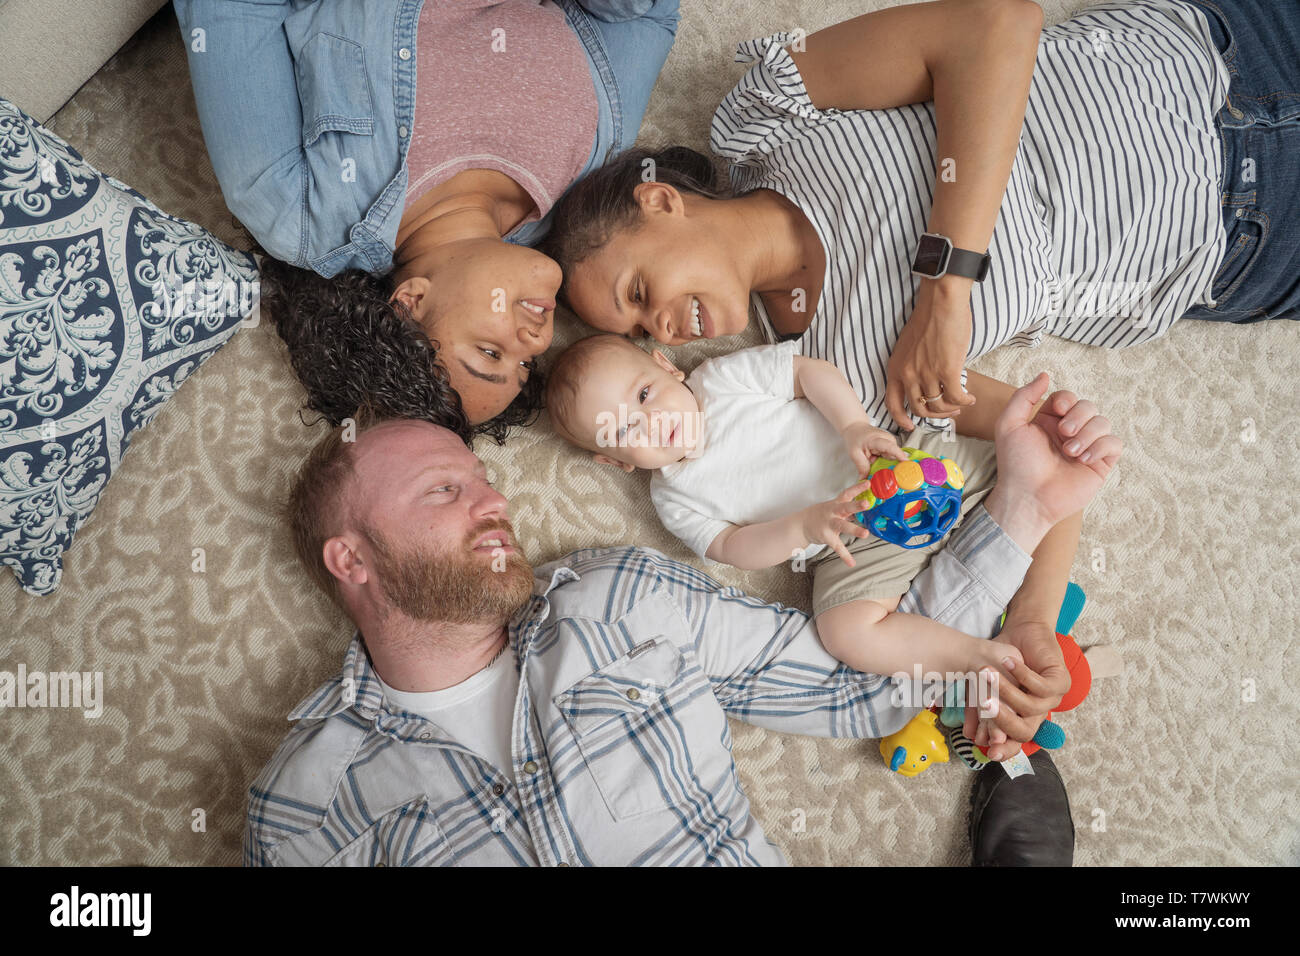 family of  4 in their home in north Philadelphia, 6 month old baby, 15 year old sister and parents. Stock Photo